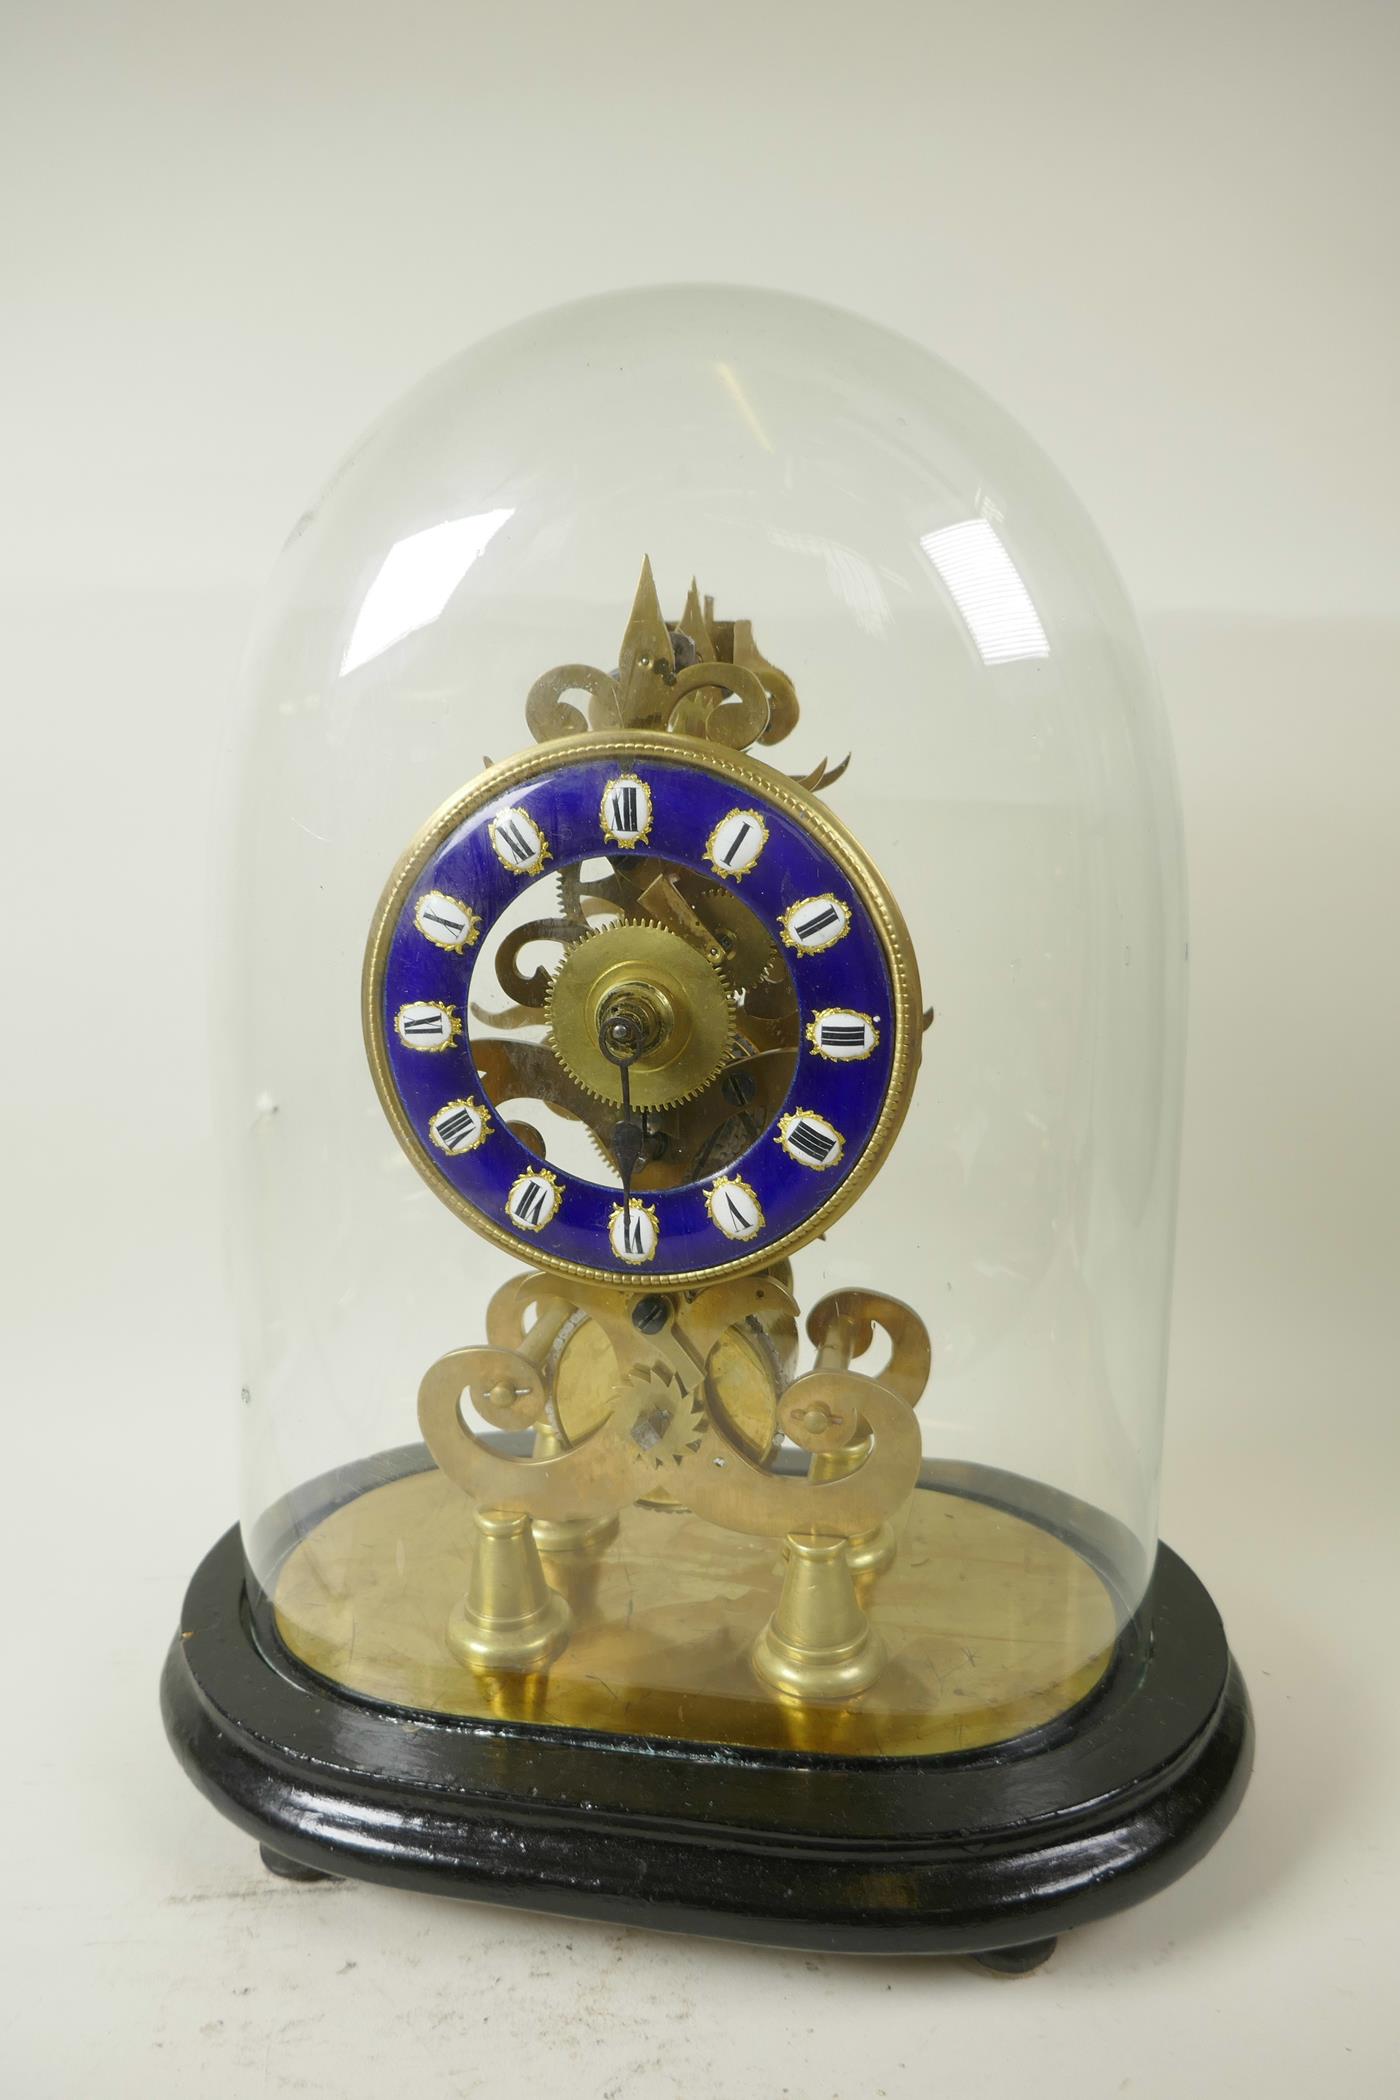 A replica brass skeleton clock with fusee movement and blue enamel chapter ring in Roman numerals,